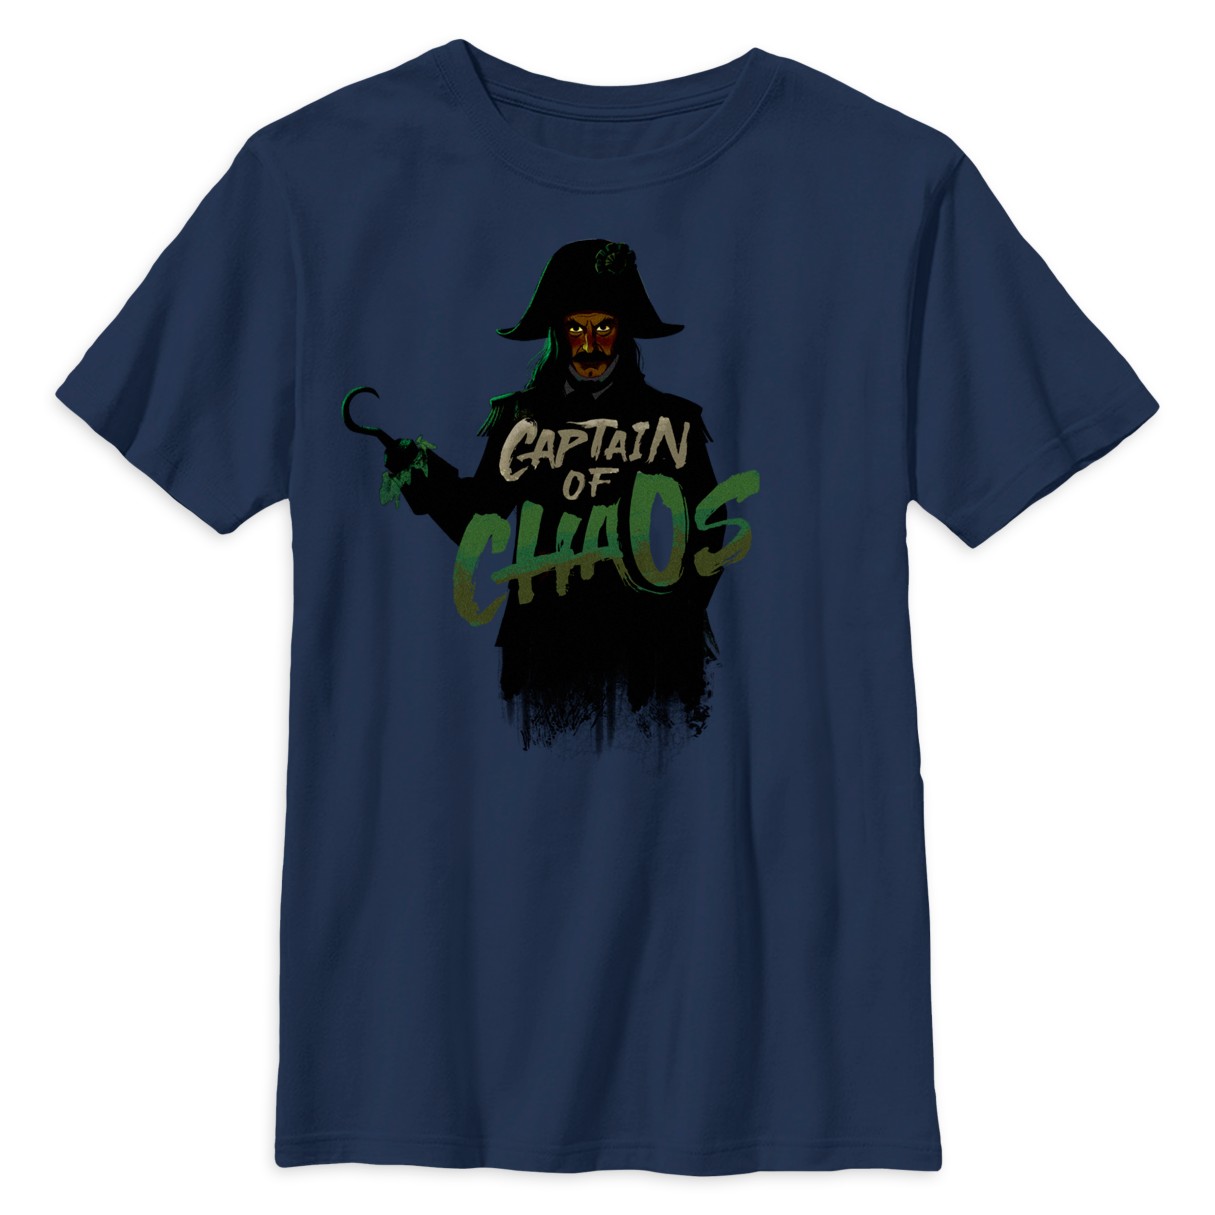 Captain Hook T-Shirt for Kids – Peter Pan & Wendy – Live Action Film